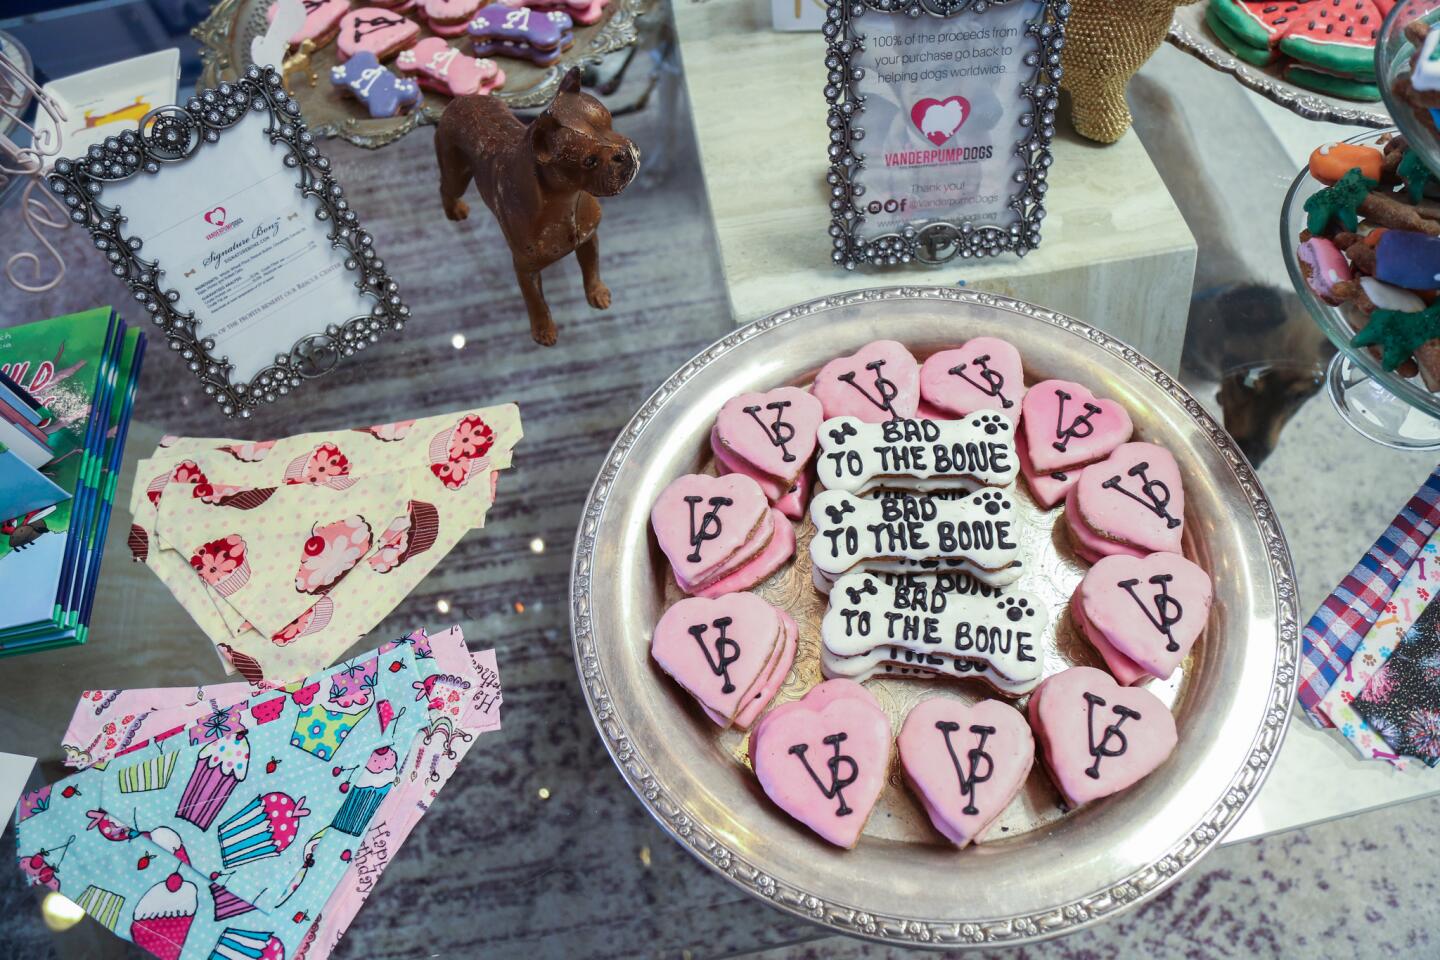 Dog treats and other merchandise at Vanderpump Dog Rescue Center, which offers not only dog adoptions but also other services and goodies.